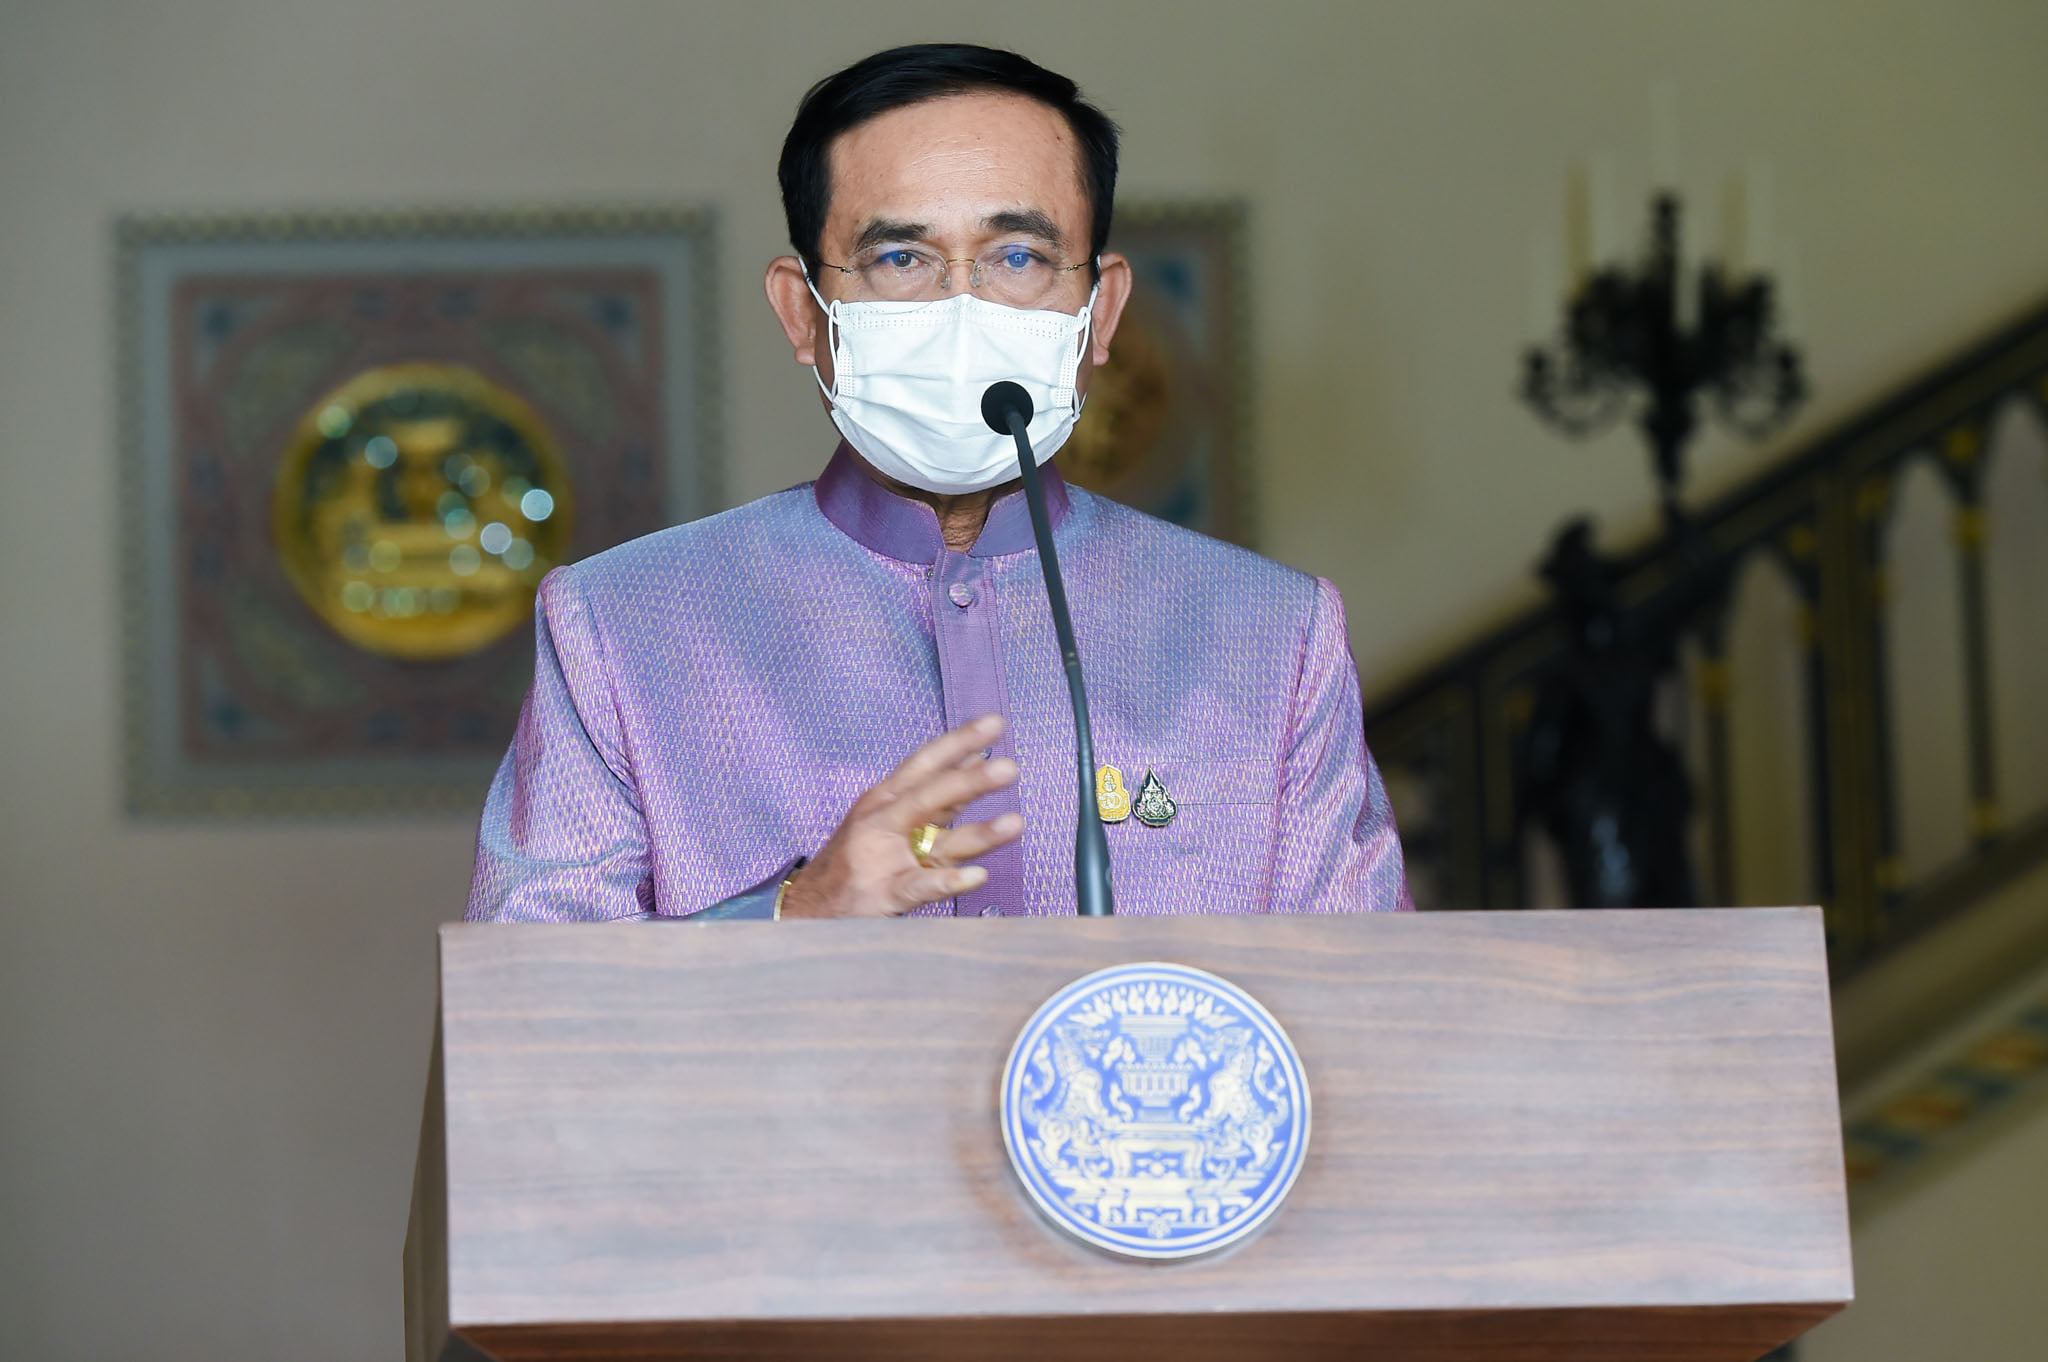 Prayut Chan-o-cha giving a speech during the Covid-19 pandemic